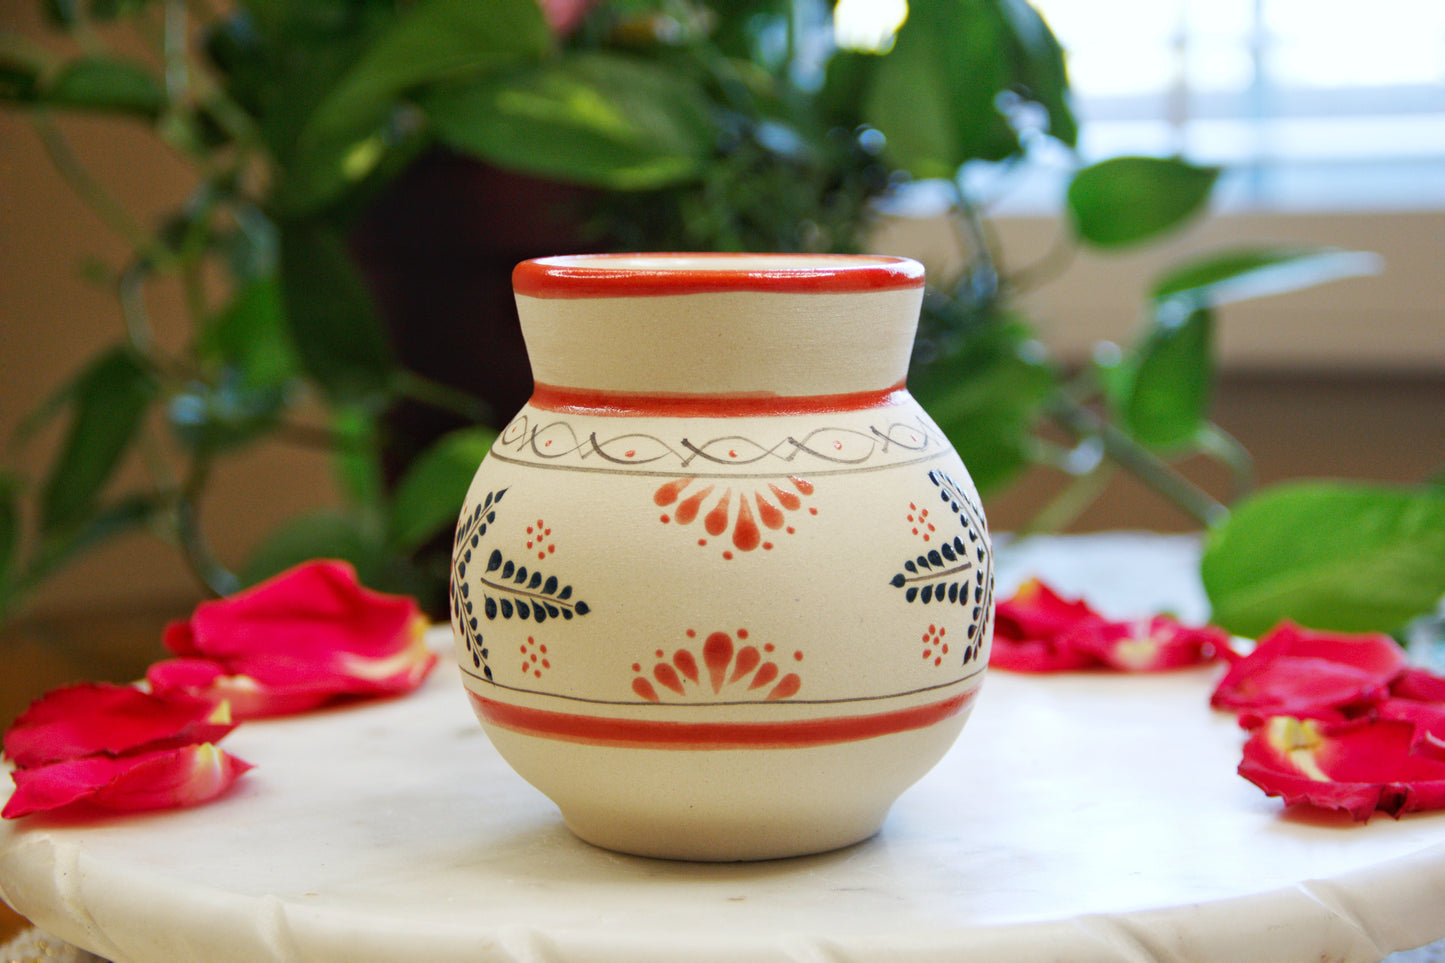 side view of a handmade artisanal candle in a red floral design mug. Custom made by Artisan in Mexico. 100% All Natural Soy Candle. Reuse the talavera as home decor or storage